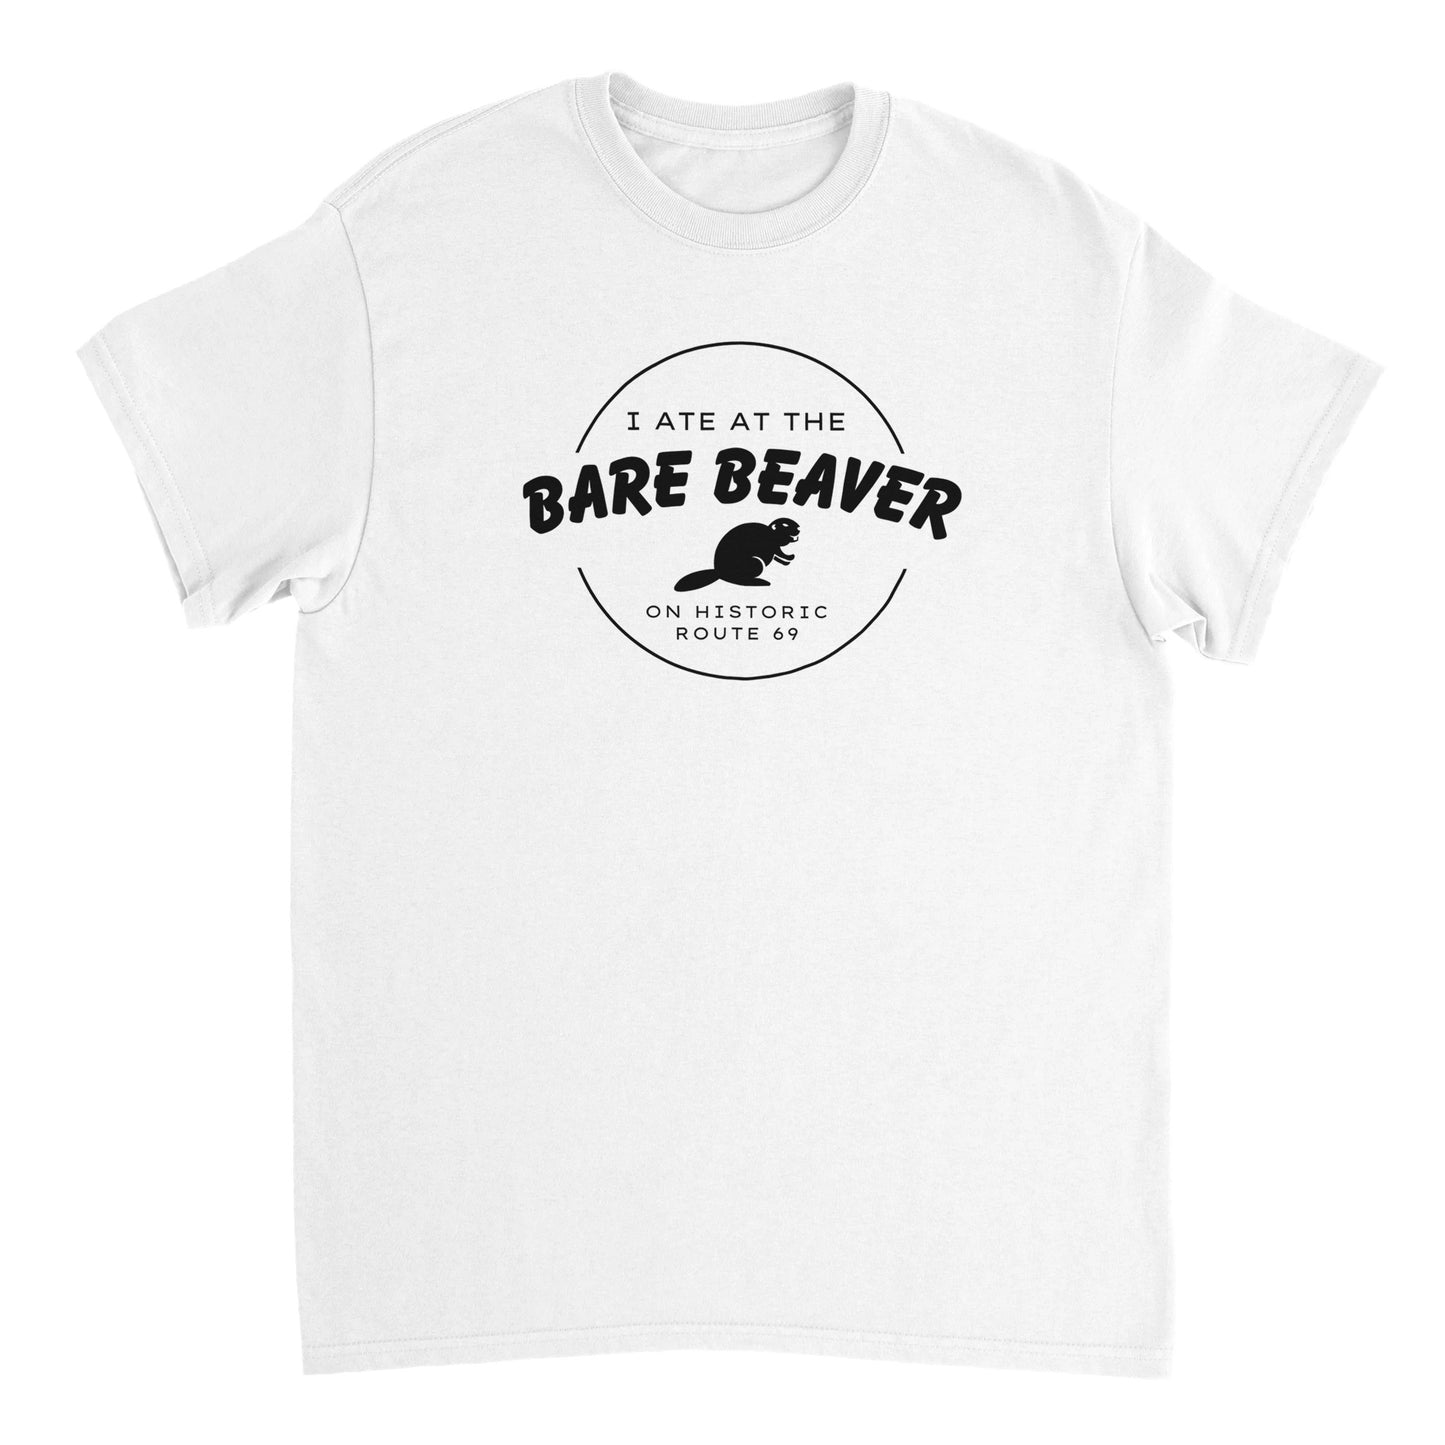 I Ate at the Bare Beaver T-shirt - Mister Snarky's